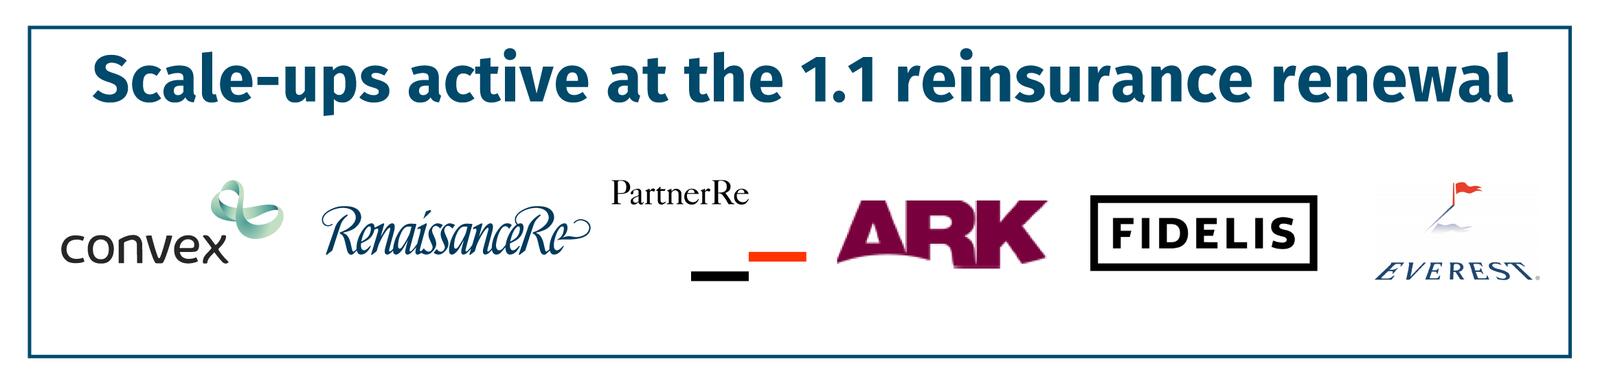 Scale-ups active at the 1.1 reinsurance renewal